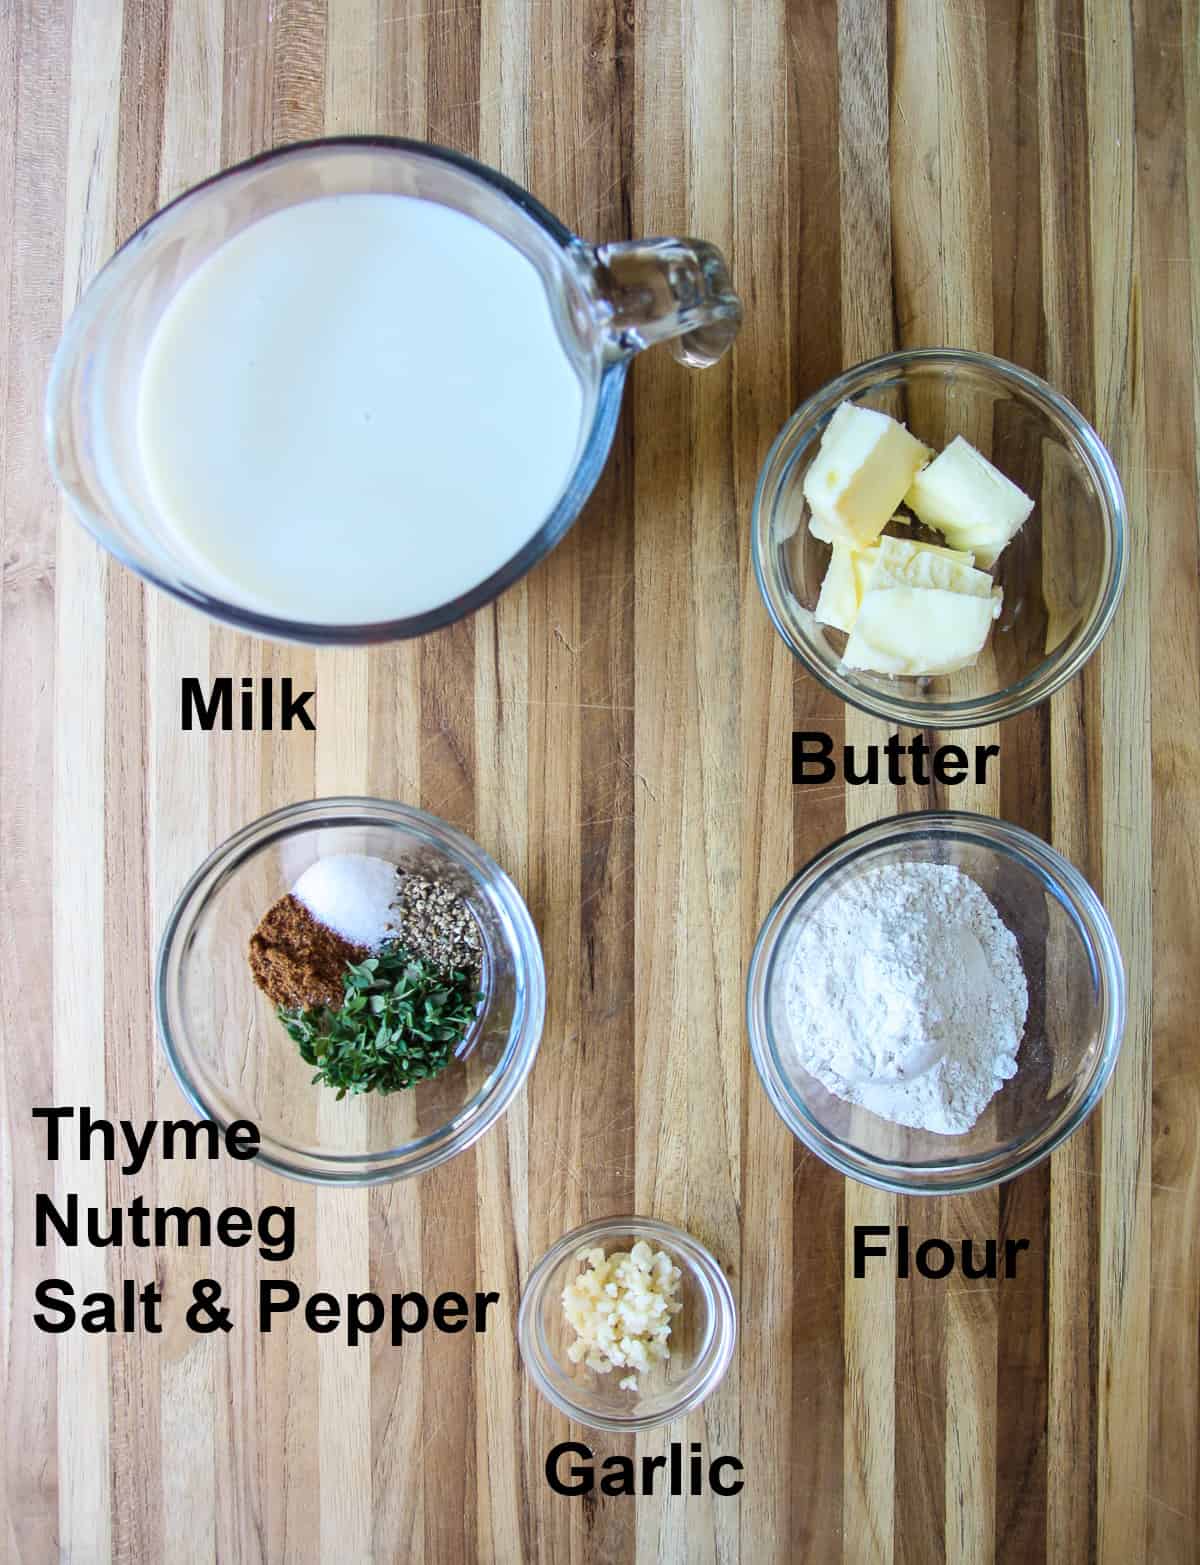 The ingredients for the béchamel sauce in glass dished on a wooden board.